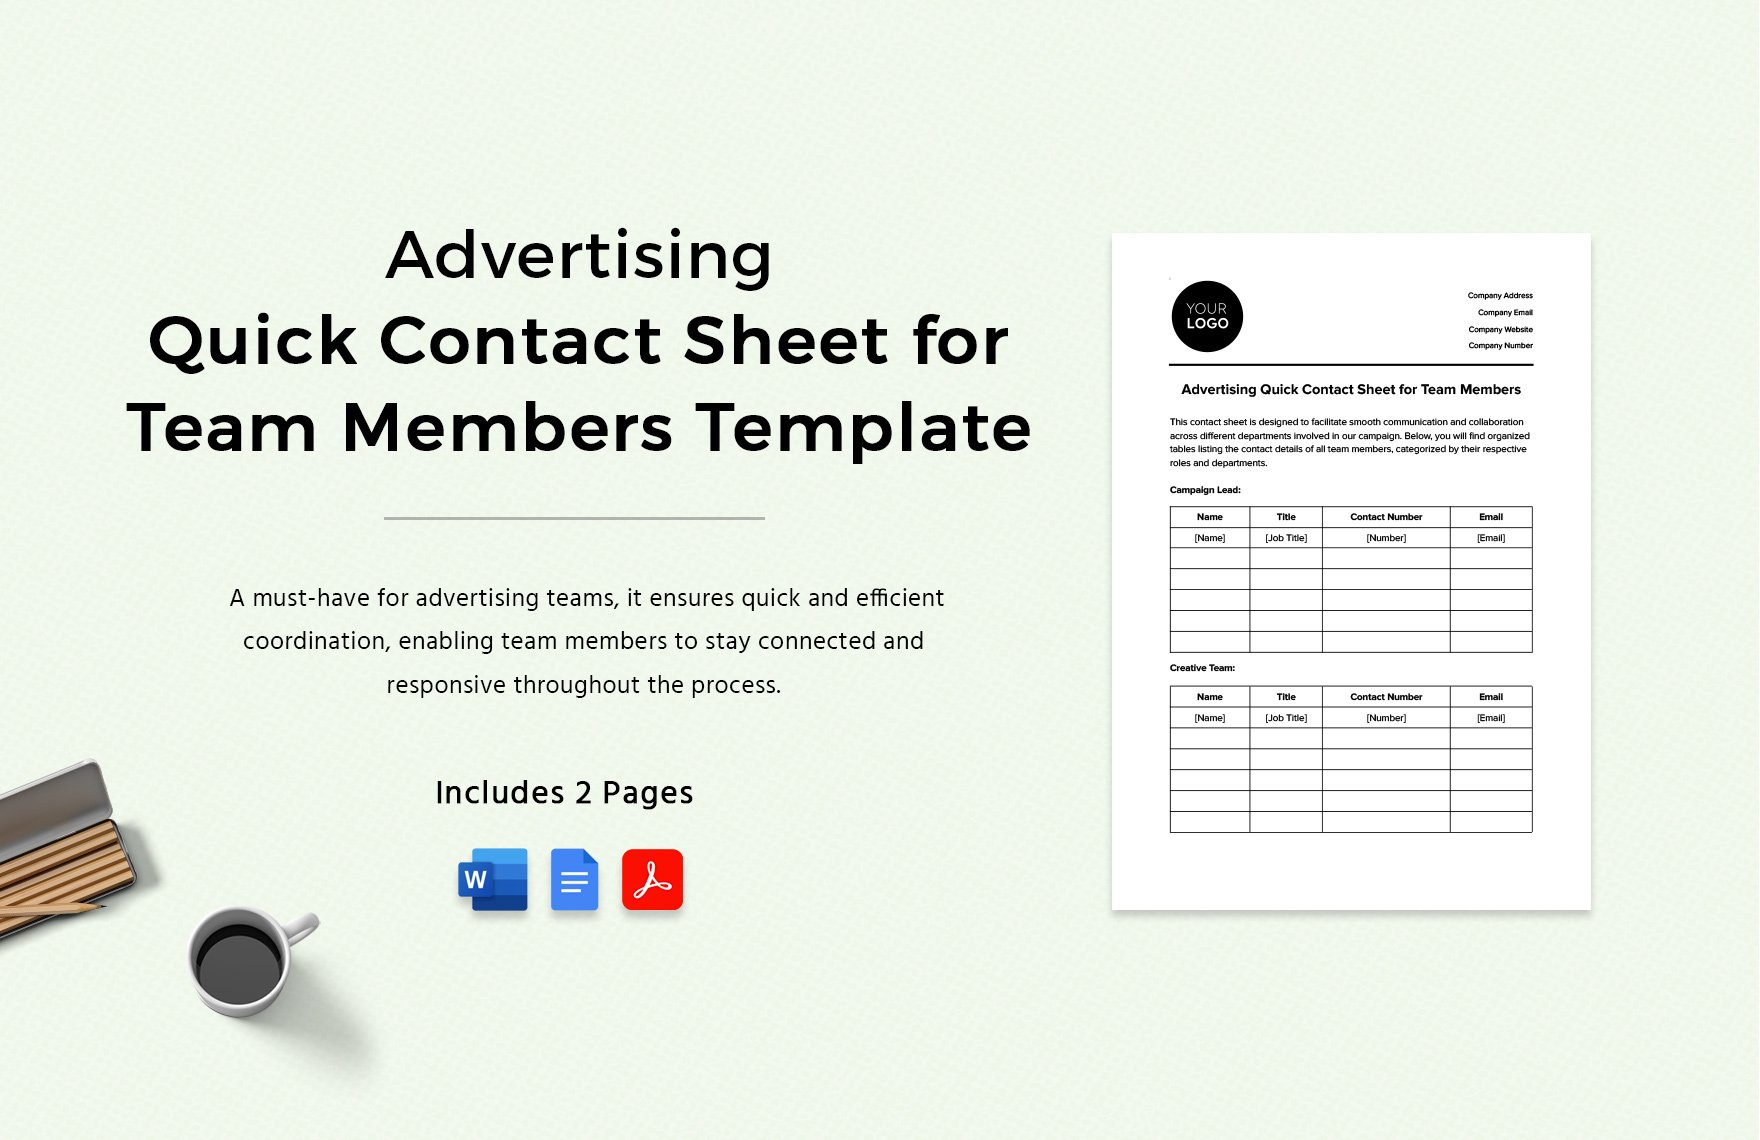 Advertising Quick Contact Sheet for Team Members Template